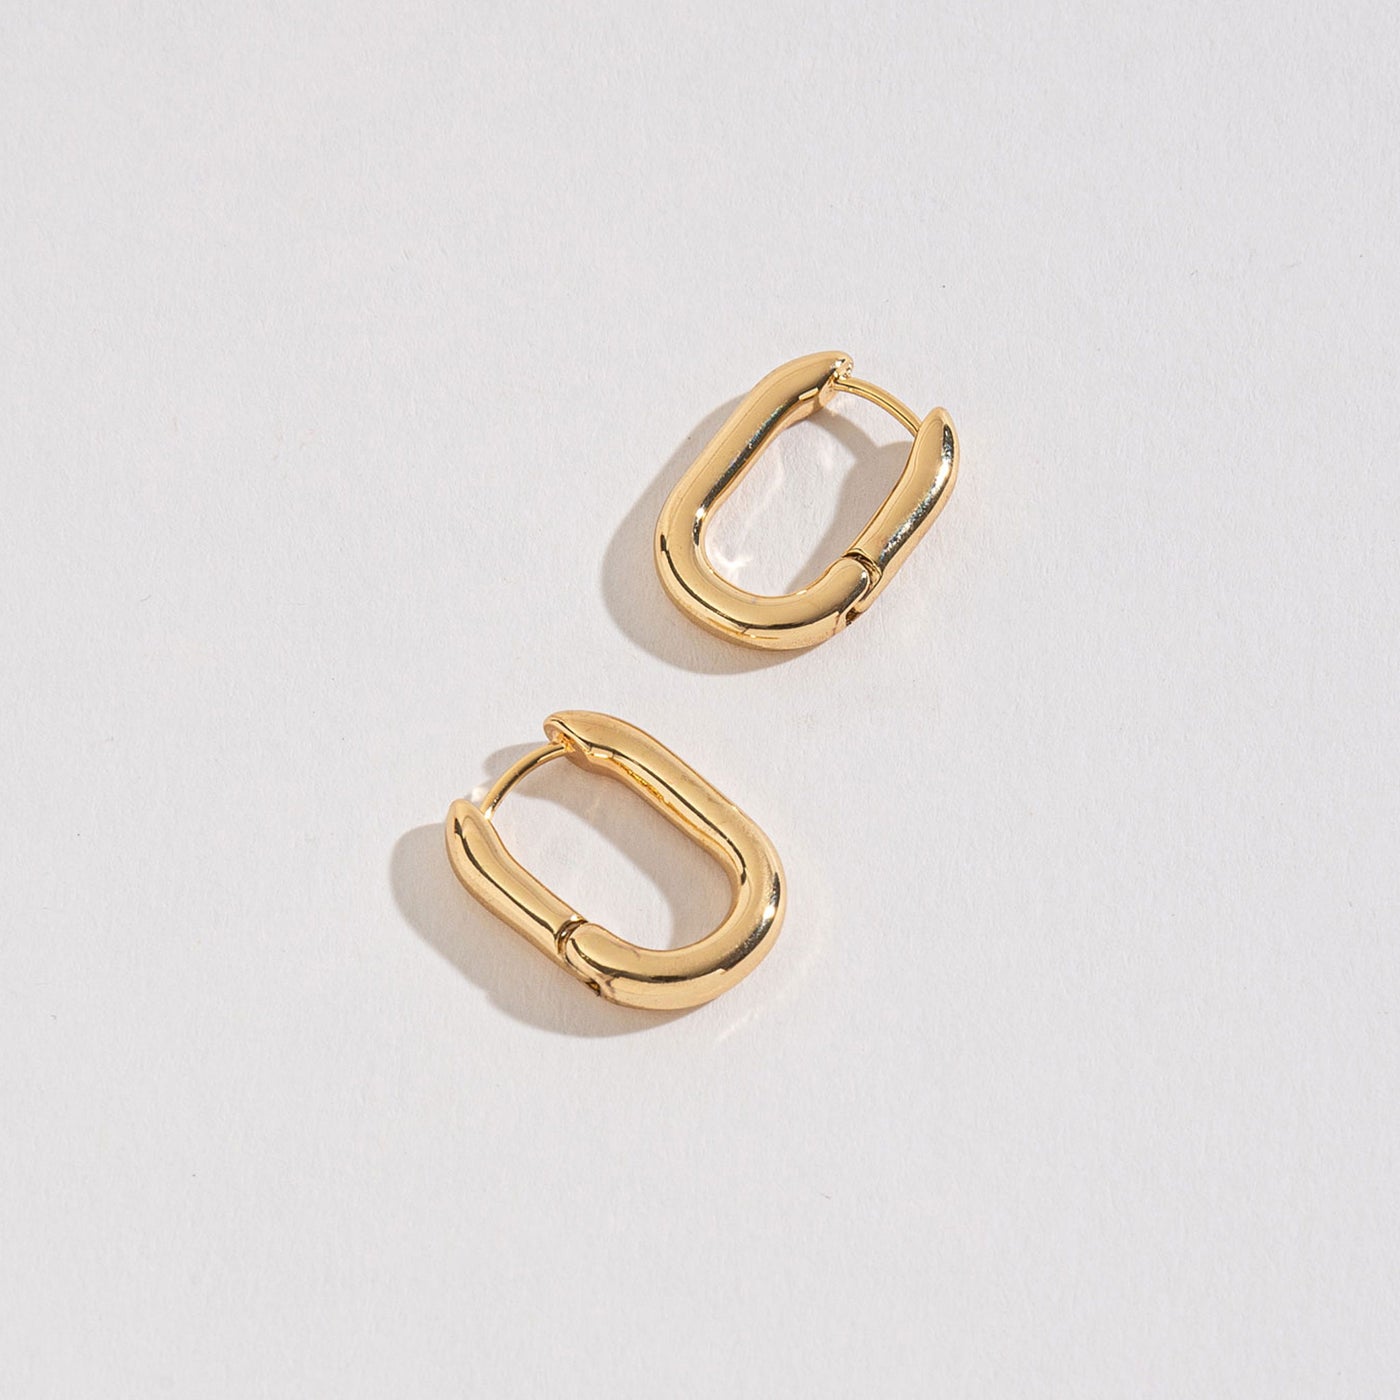 gold medium link huggie hoops on a white background.